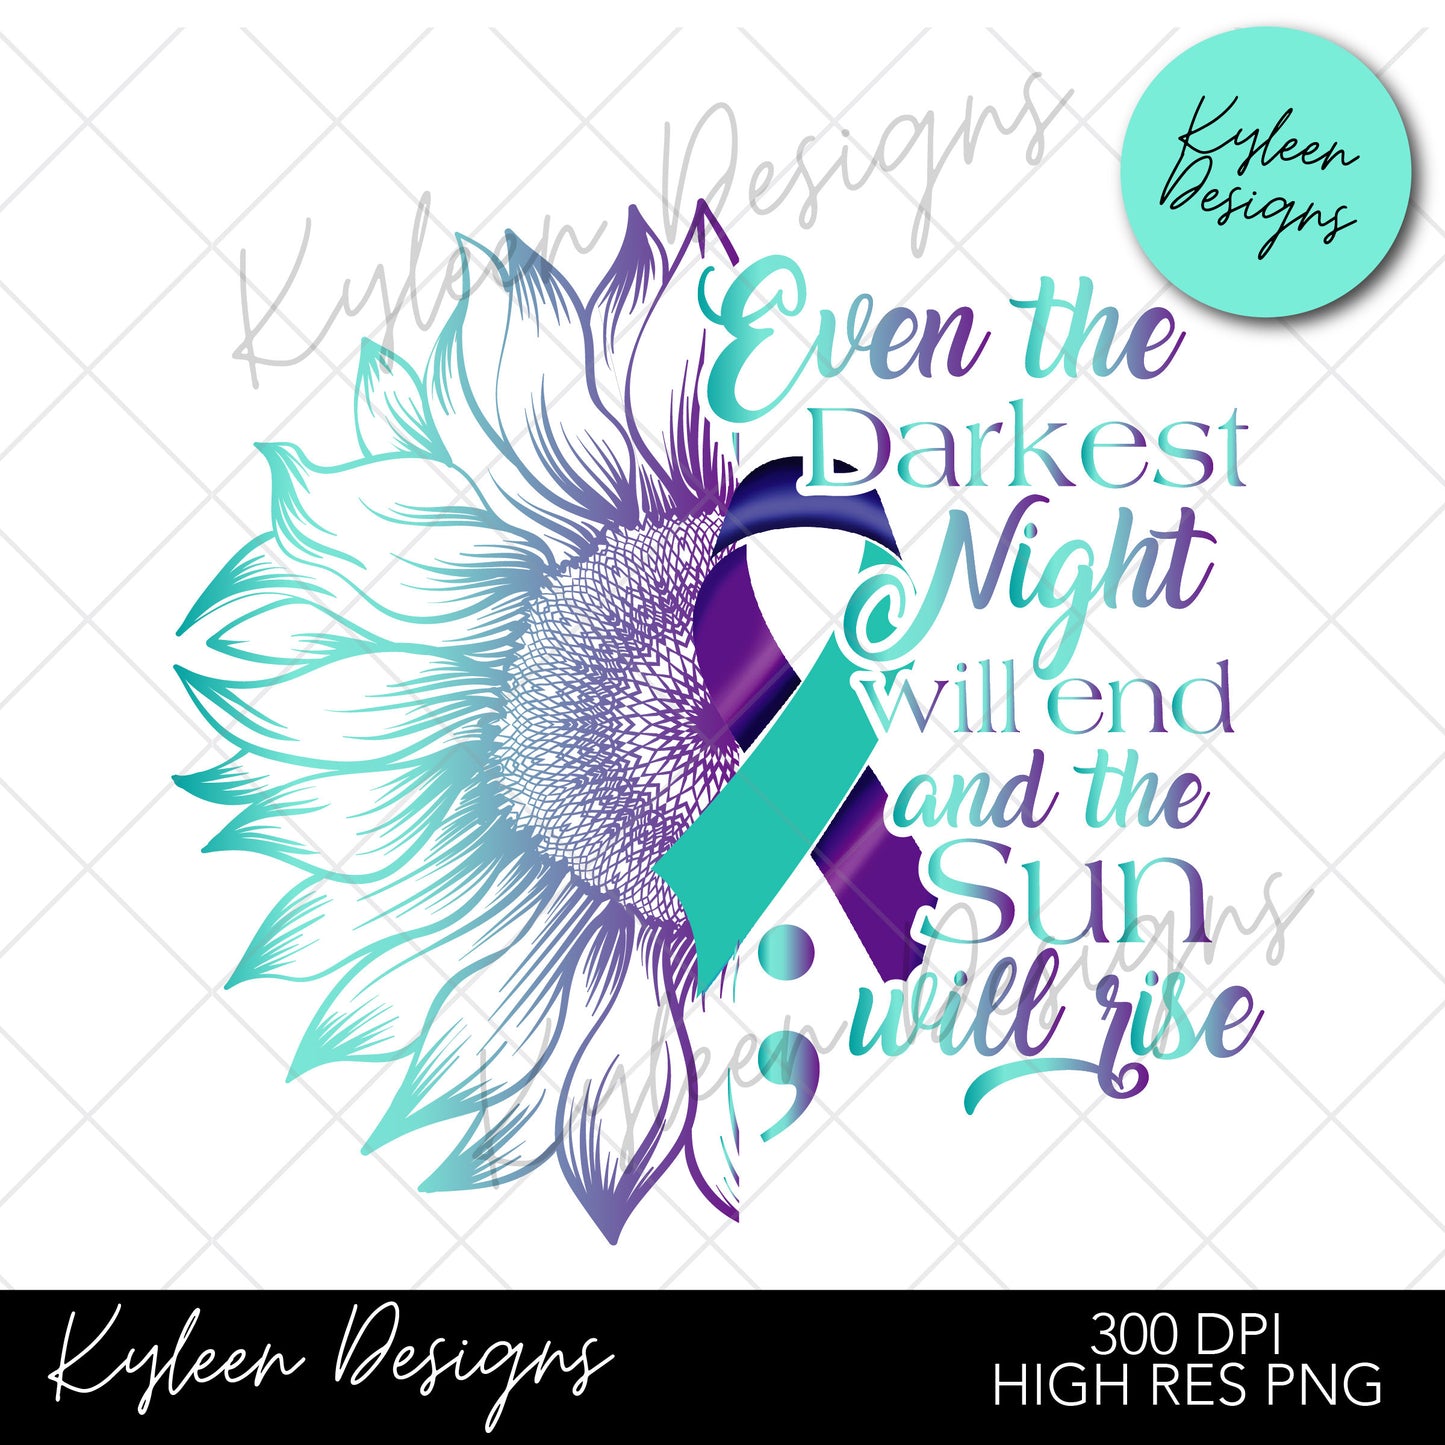 20 ounce straight SEAMLESS suicide awareness teal/ purple ribbon wrap for sublimation, waterslide High res PNG digital file- Straight only